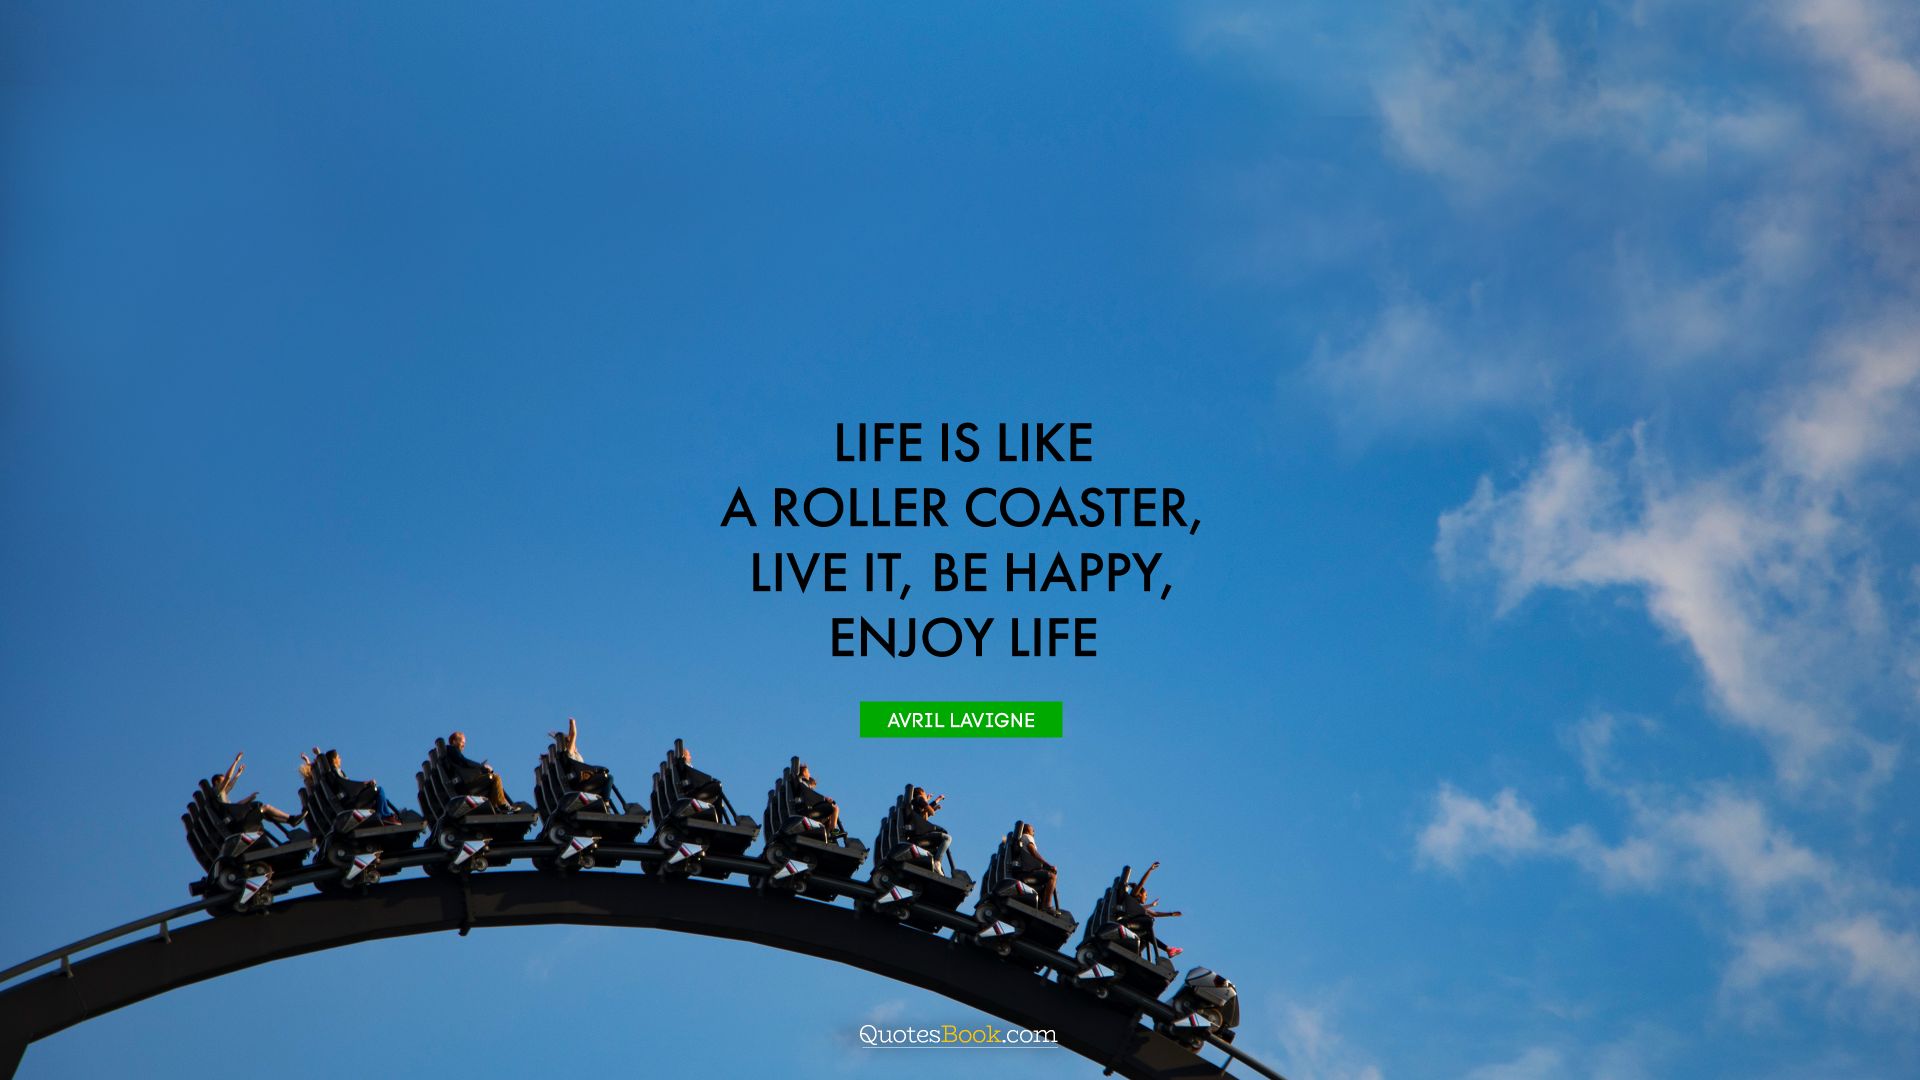 Life is like a roller coaster, live it, be happy, enjoy life. - Quote by Avril Lavigne